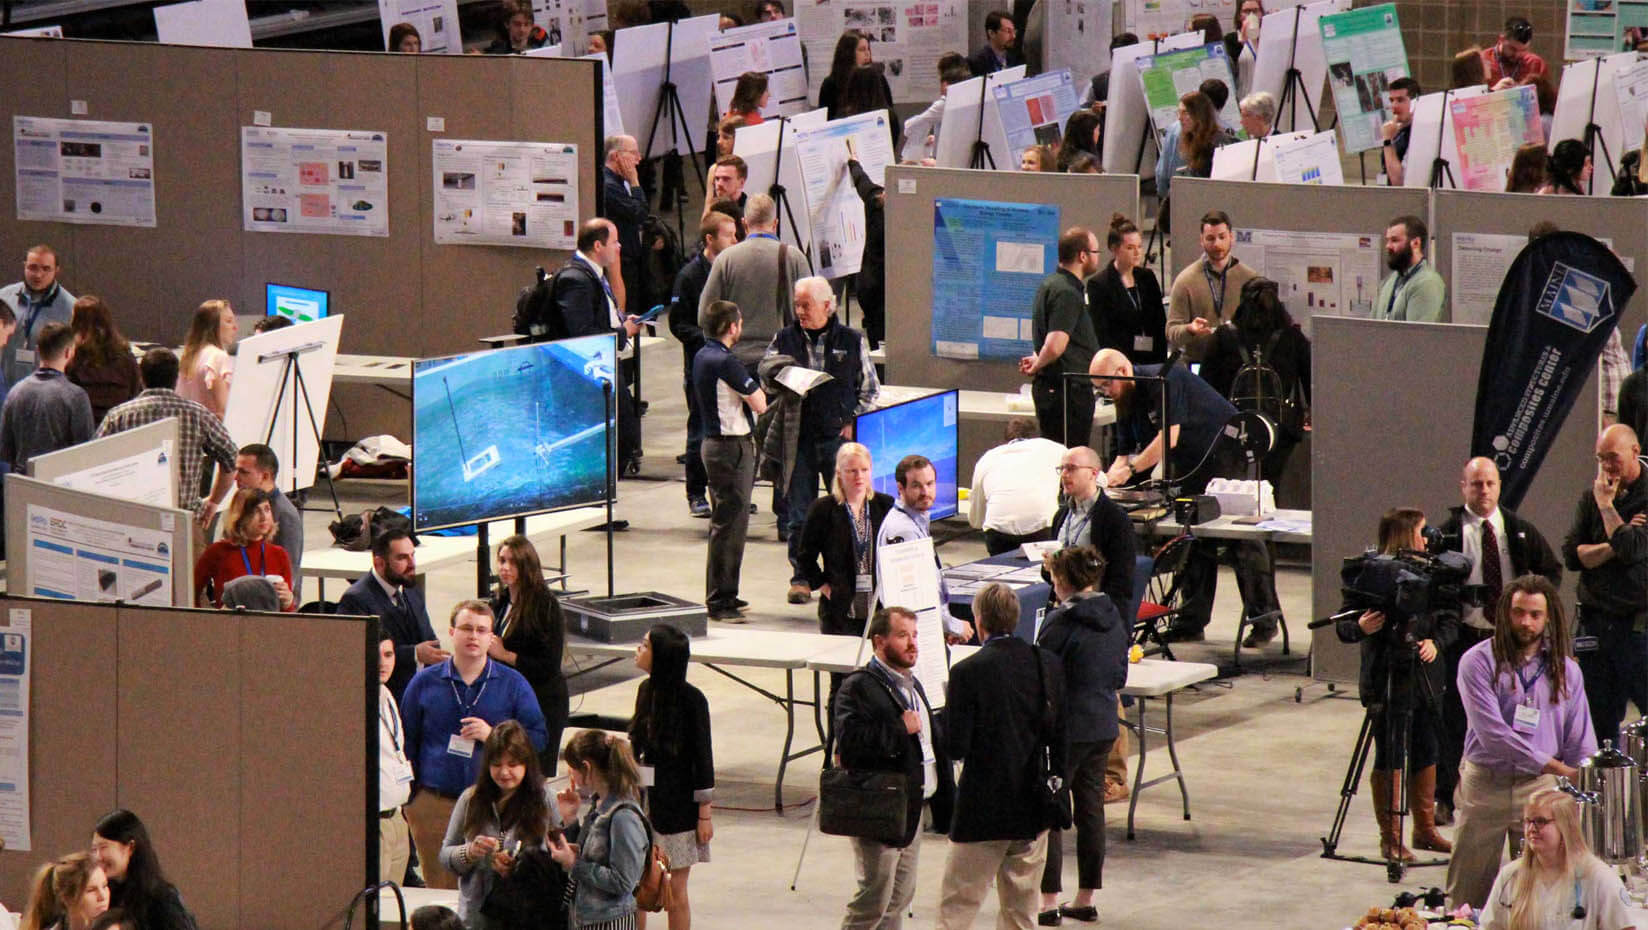 A photo of presenters and attendees standing in a large room with posters